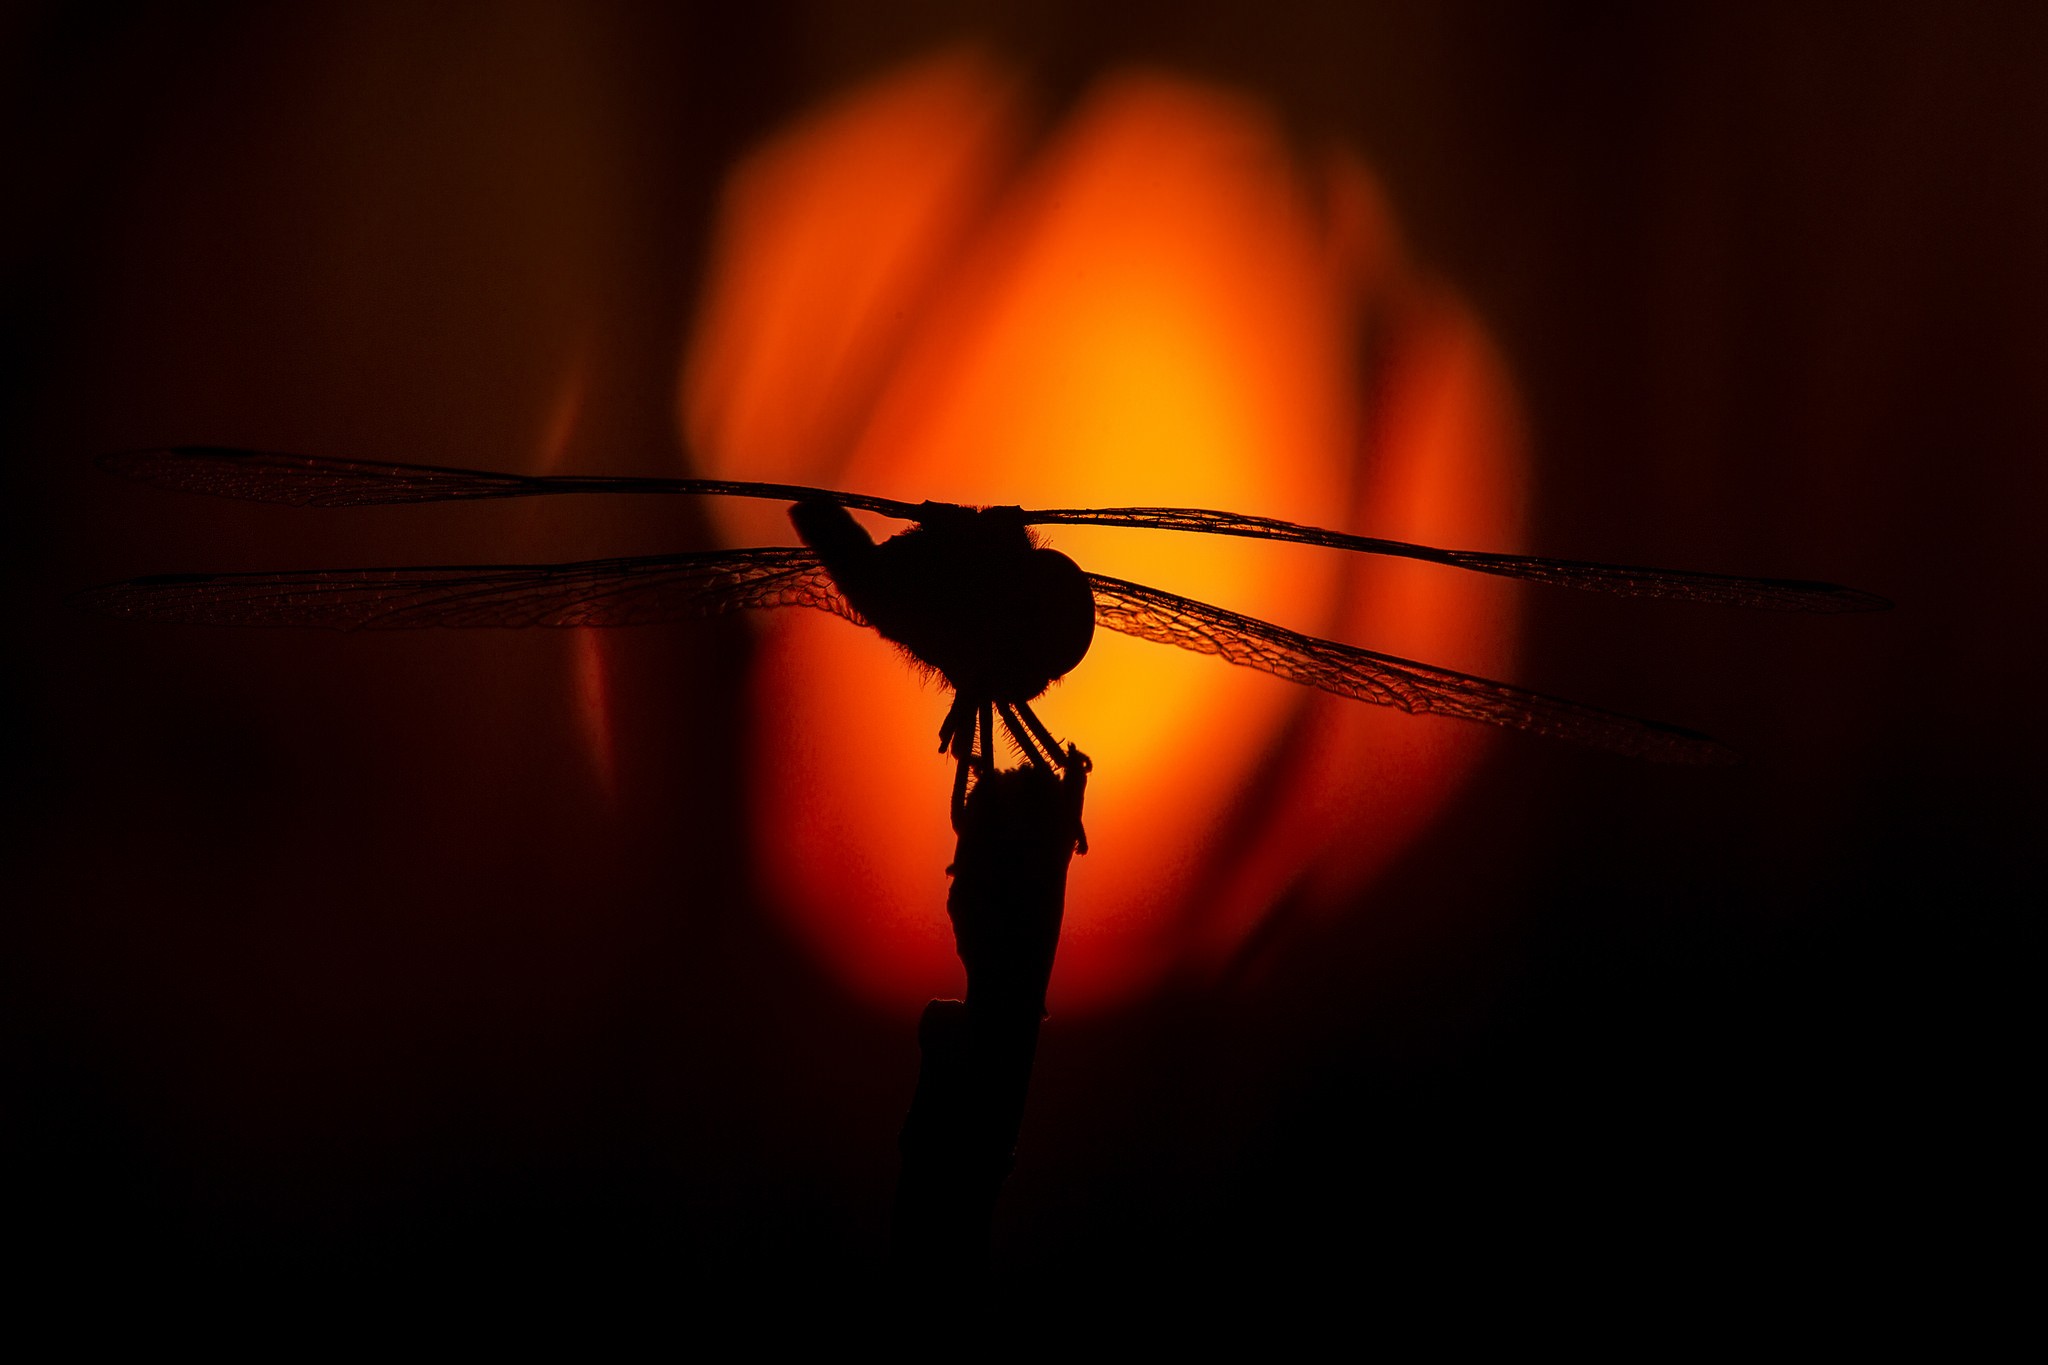 General 2048x1365 animals dragonflies insect dark nature silhouette